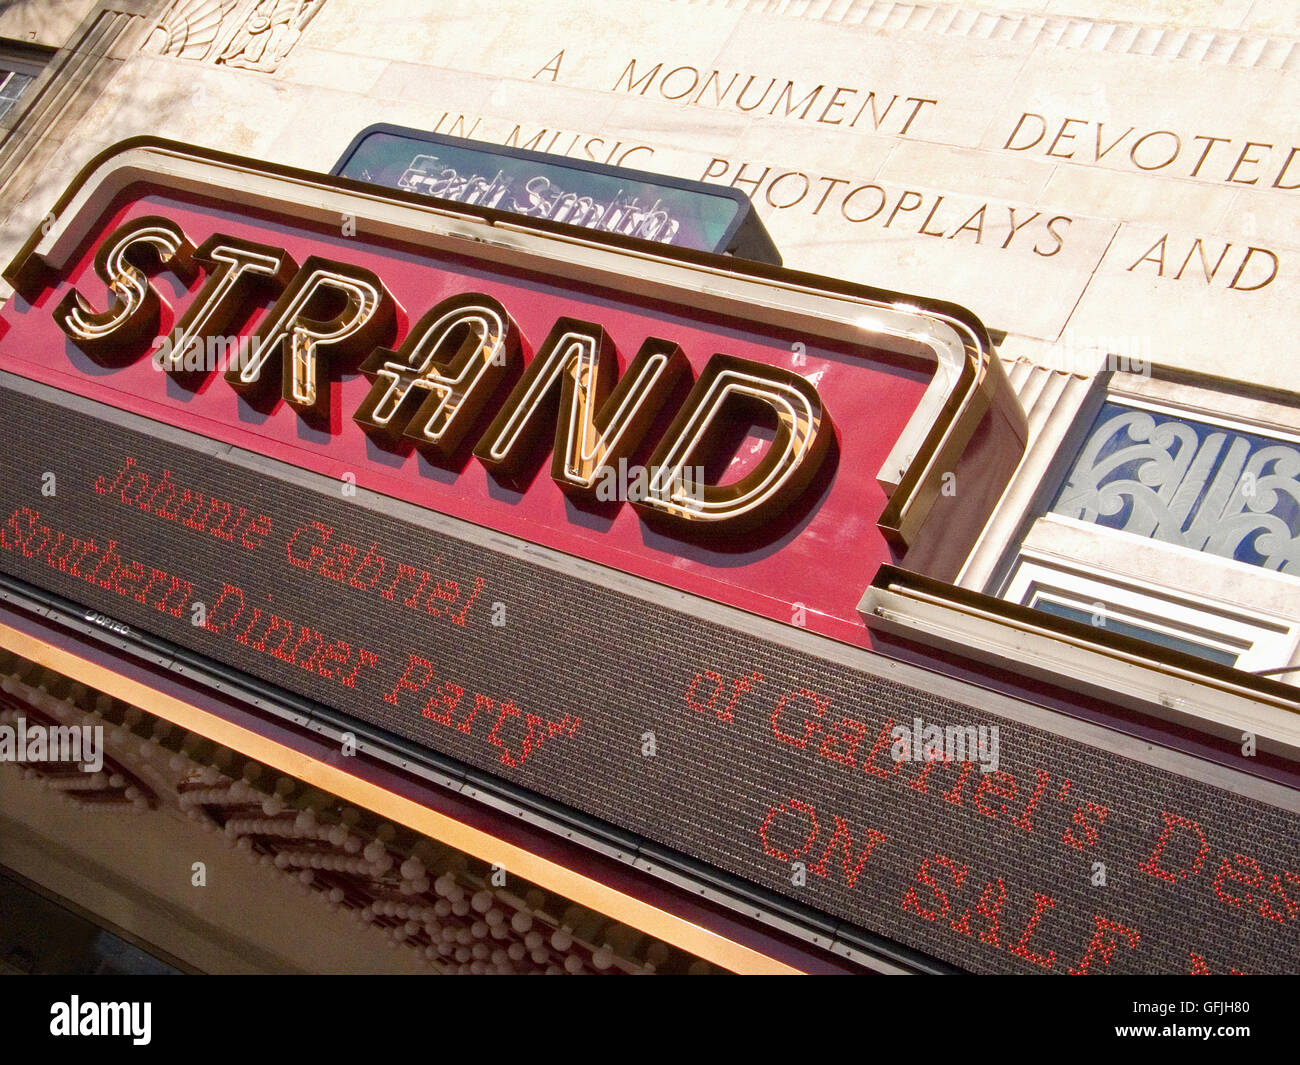 The marque of the Strand Theater in Marietta, Georgia features a classic cinema theater vibe. Stock Photo